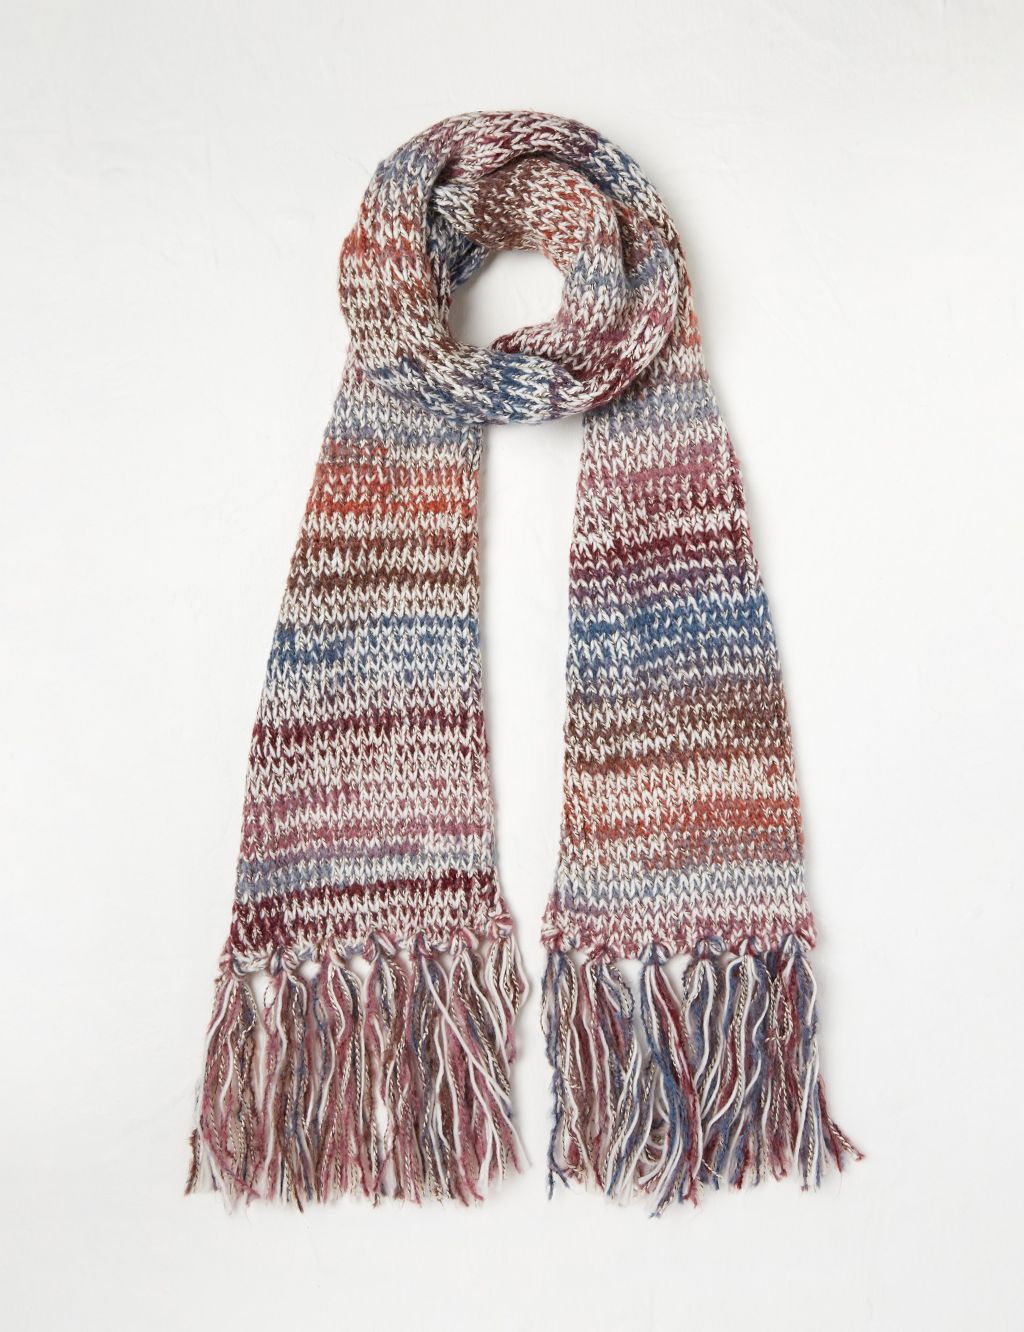 Knitted Space Dye Tassel Scarf image 1